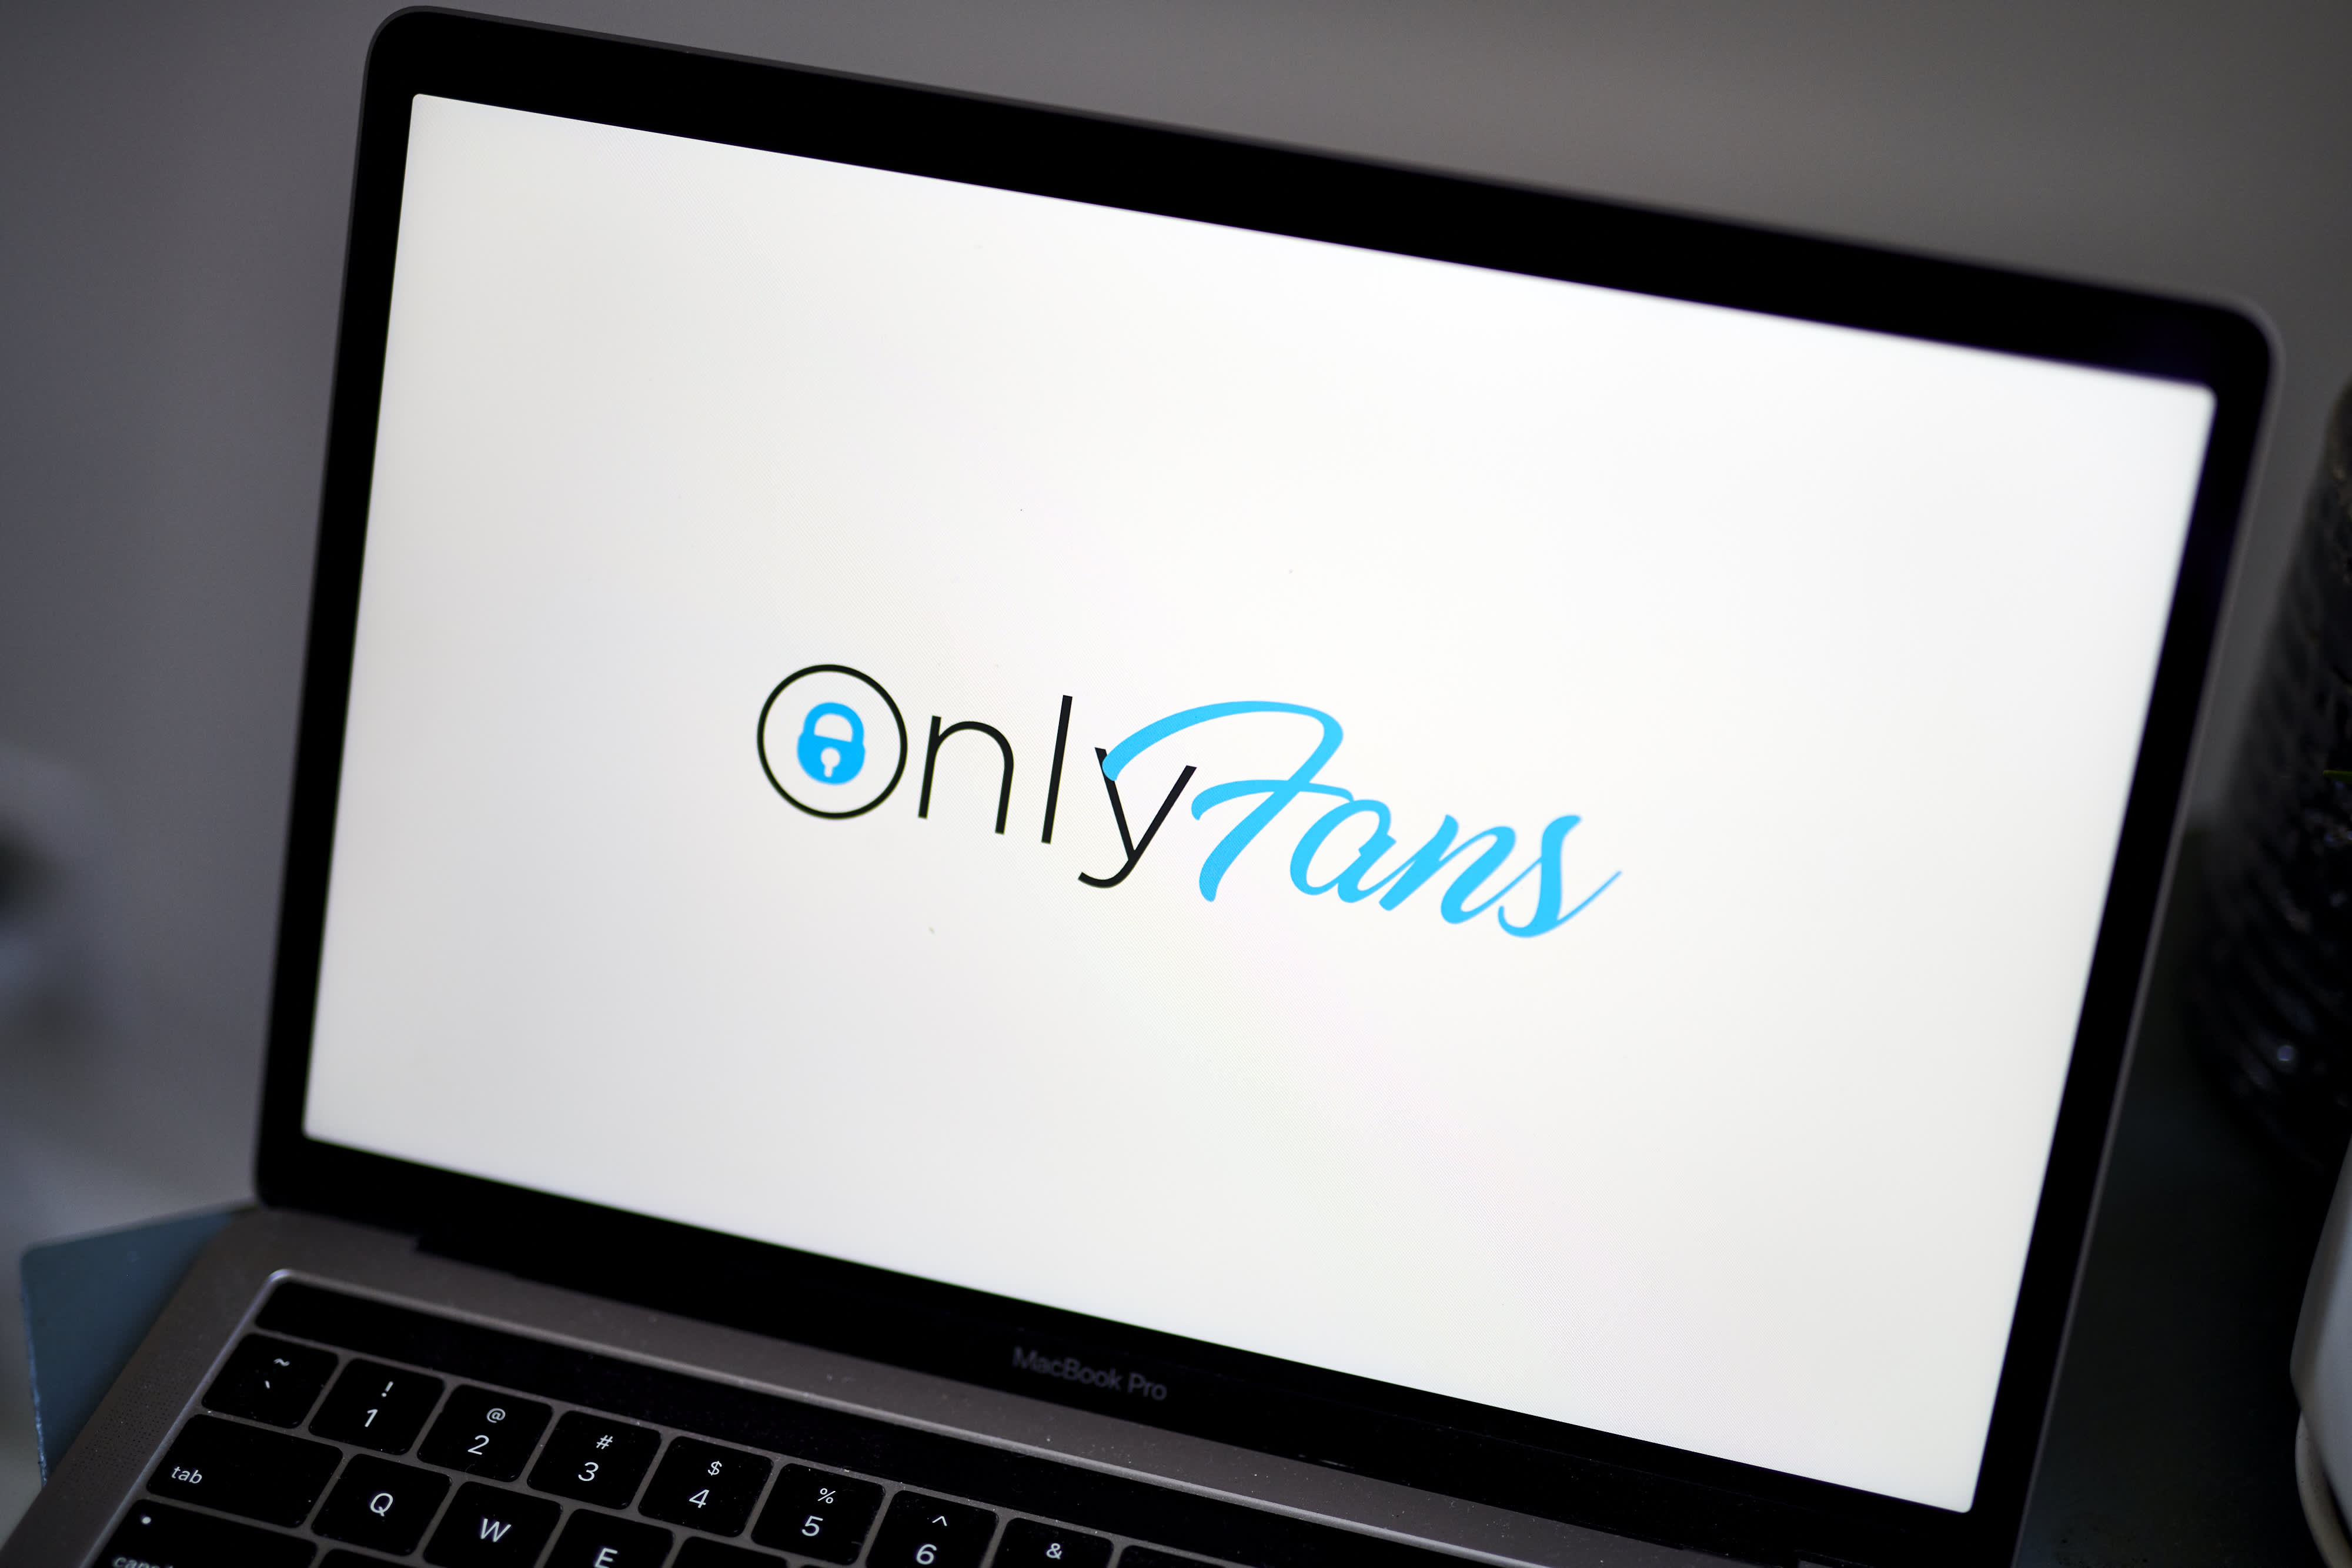 Reap Force Pron Video - OnlyFans bans sexually explicit content